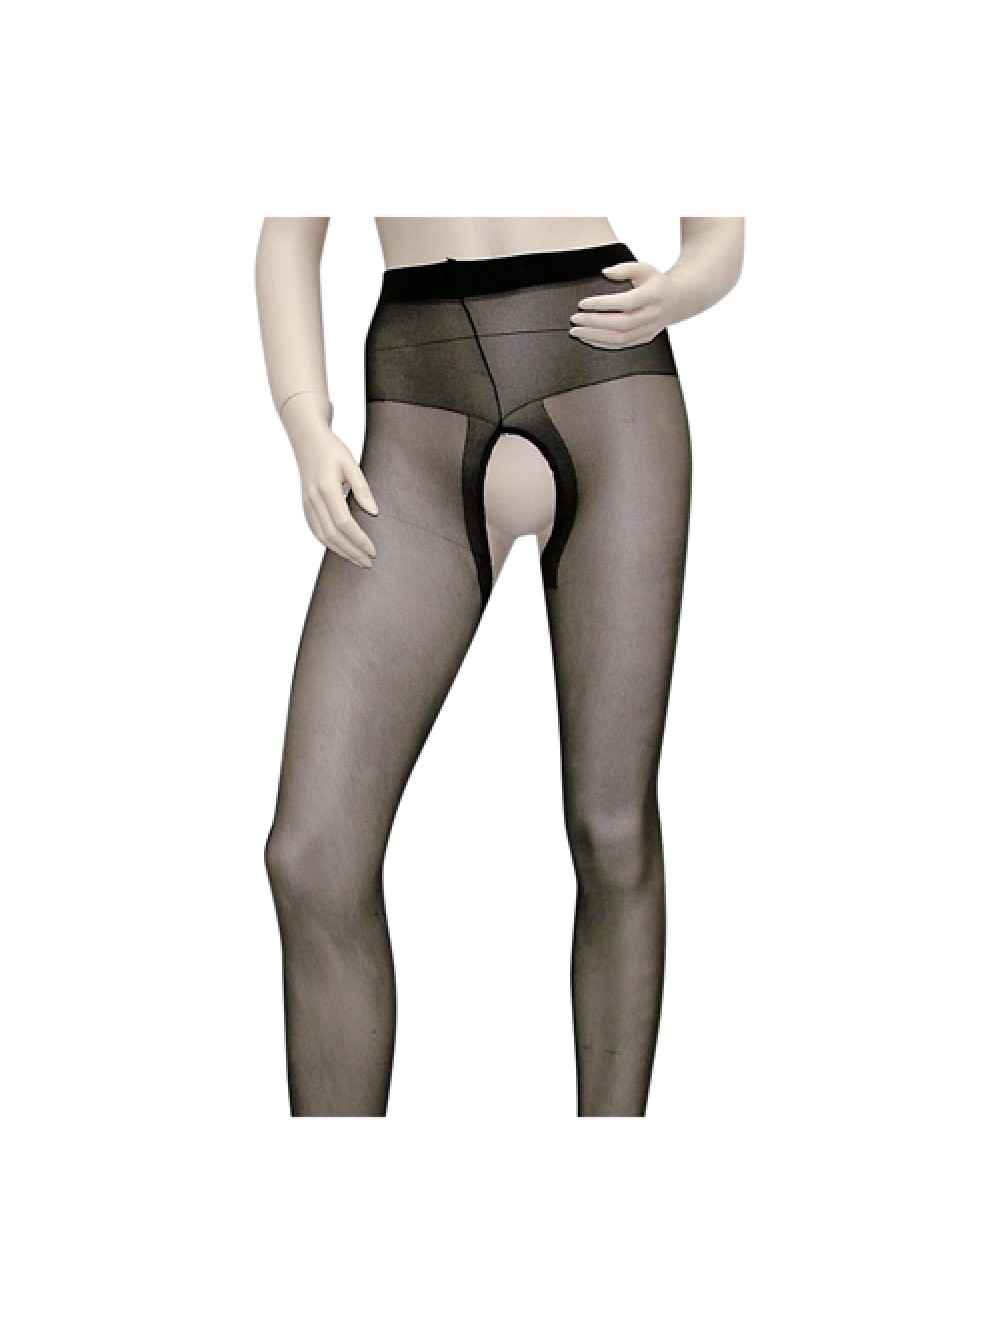 Crotchless Tights black 4024144044283